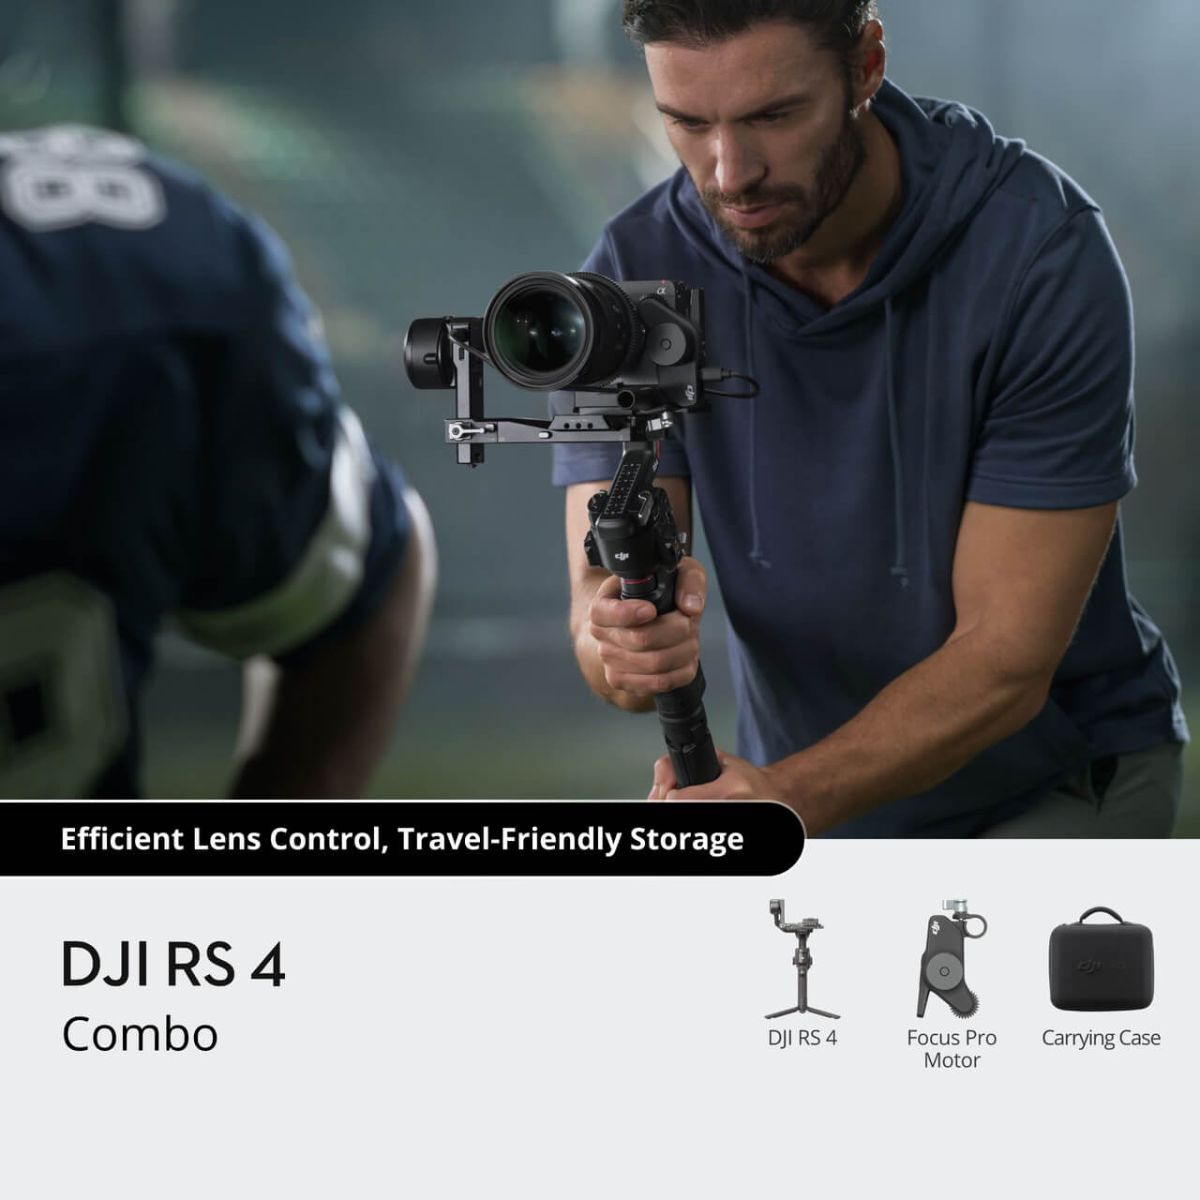 DJI Ronin RS 4 Combo 3-Axis Camera Gimbal Stabilizer w/ Focus Pro Motor, 3Kg Max Payload, BG21 Battery Grip w/ 12hr Operating Time, 2nd Gen Auto Axis Locks & OLED Touchscreen Controls for Canon Nikon Sony Fujifilm Panasonic DSLR Mirrorless